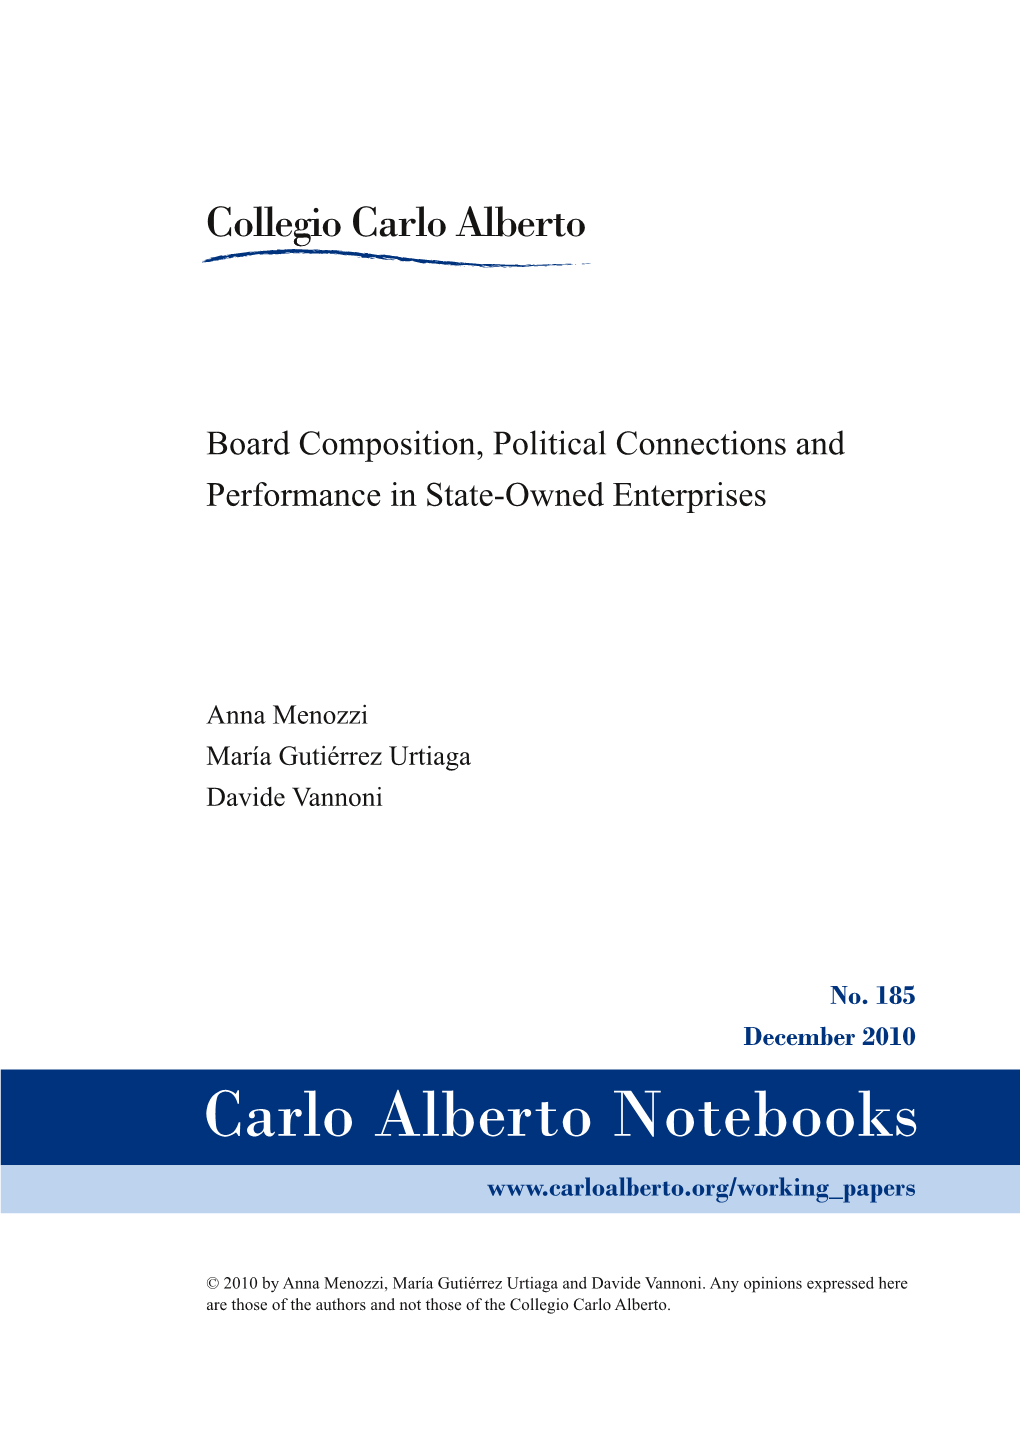 Board Composition, Political Connections and Performance in State-Owned Enterprises